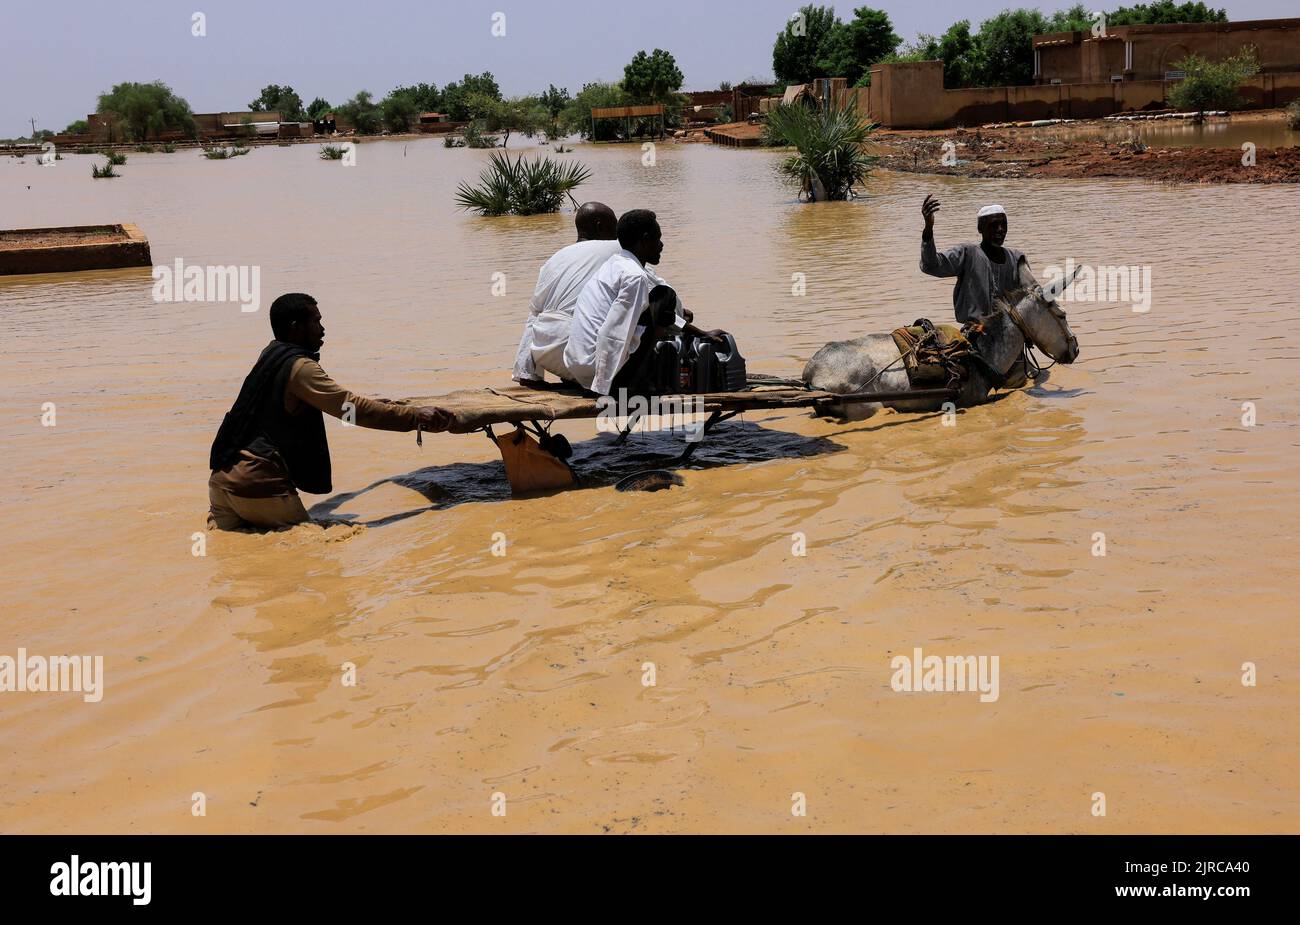 People ride a donkey cart to cross the water during flood in Al-Managil locality in Jazeera State, Sudan, August 23, 2022. REUTERS/Mohamed Nureldin Abdallah Stock Photo